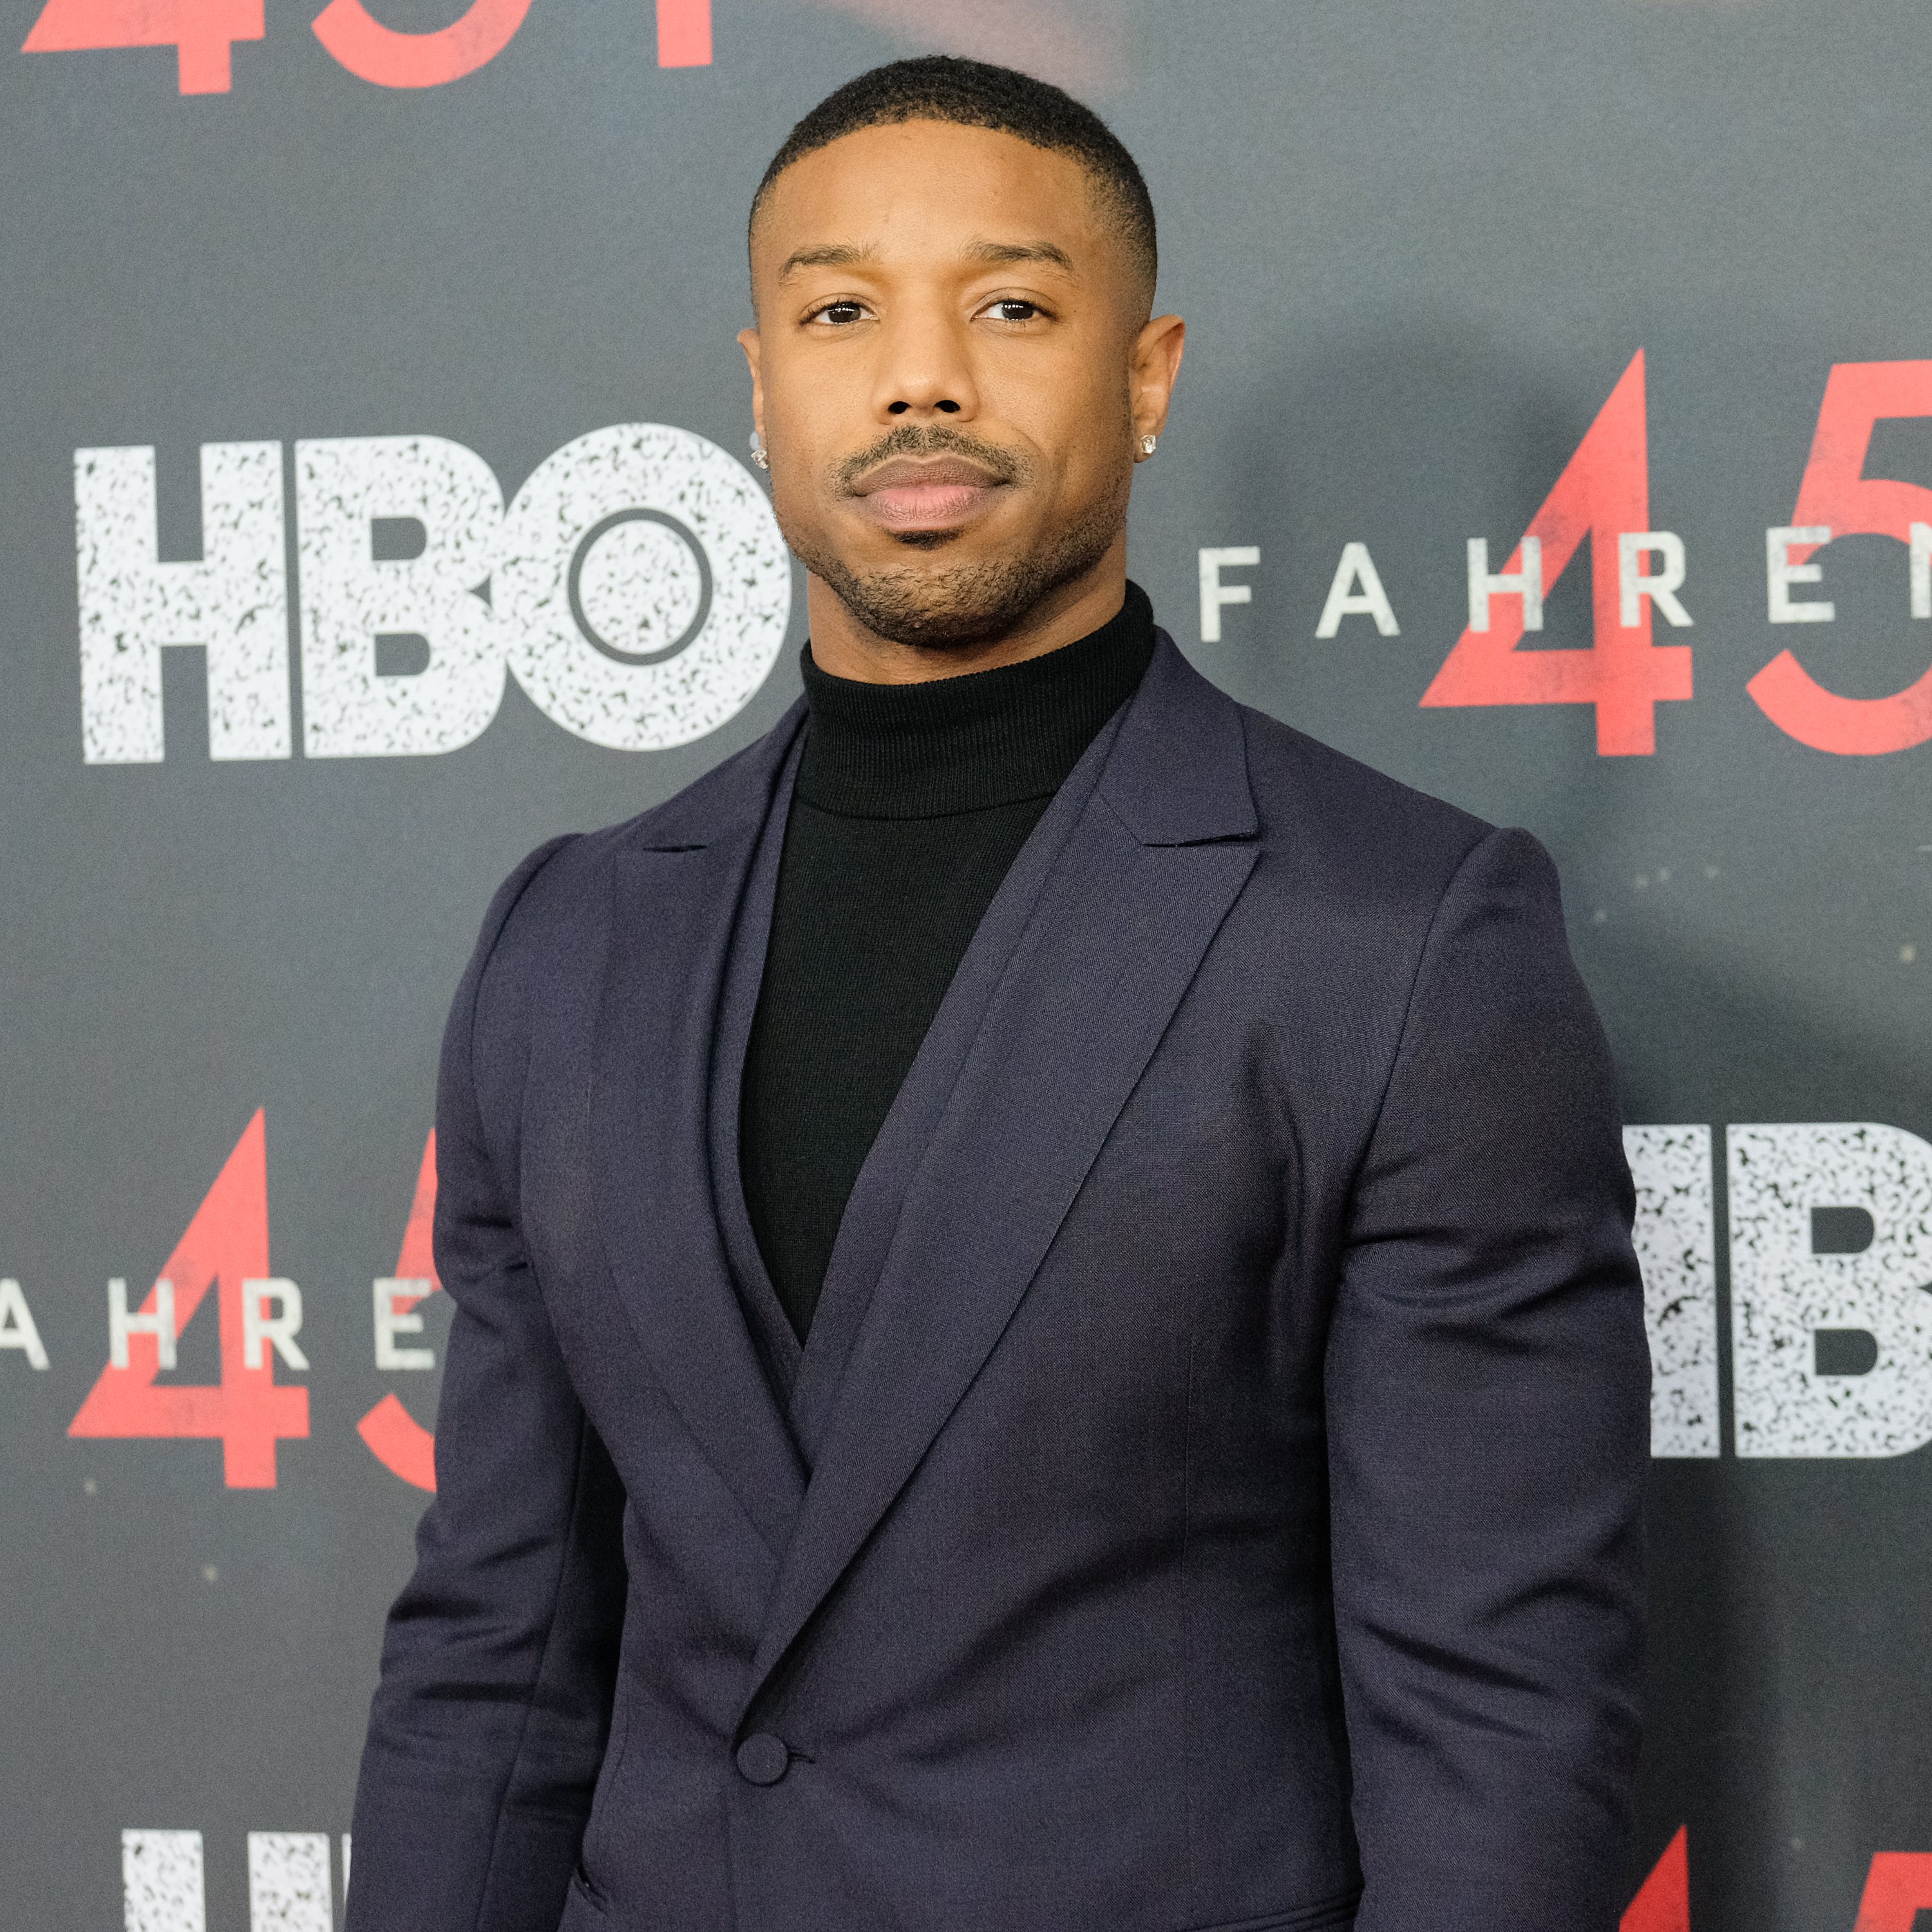 Michael B. Jordan attends the "Fahrenheit 451" New York Premiere at NYU Skirball Center on May 8, 2018 | Photo: GettyImages